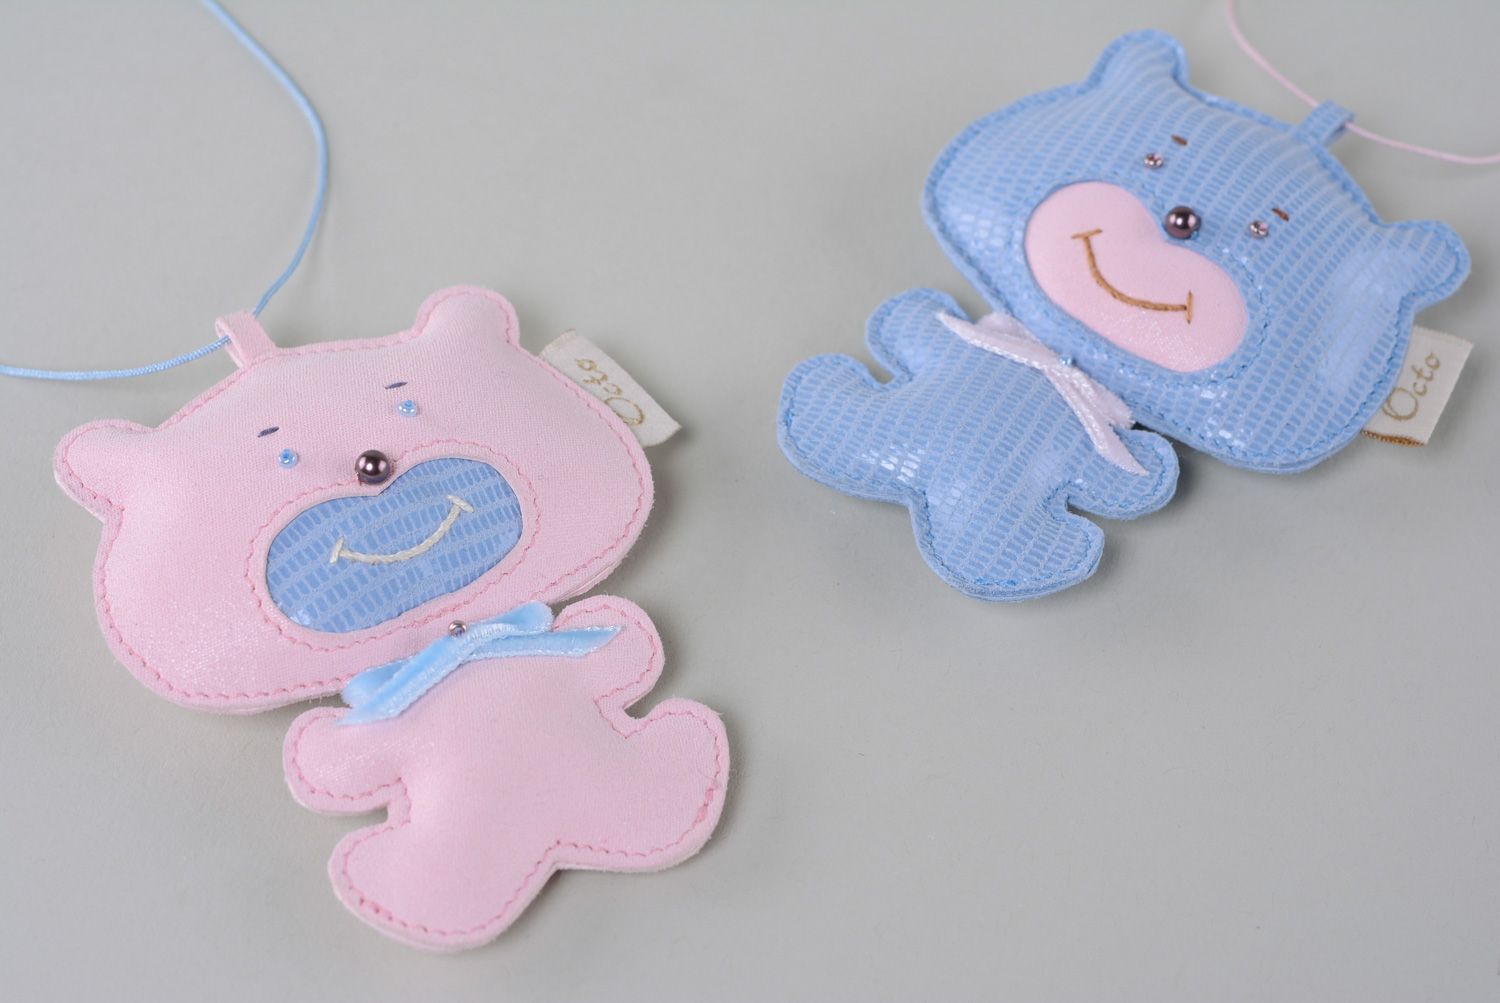 Homemade genuine leather key fob in the shape of cute pink bear charm for bag photo 5